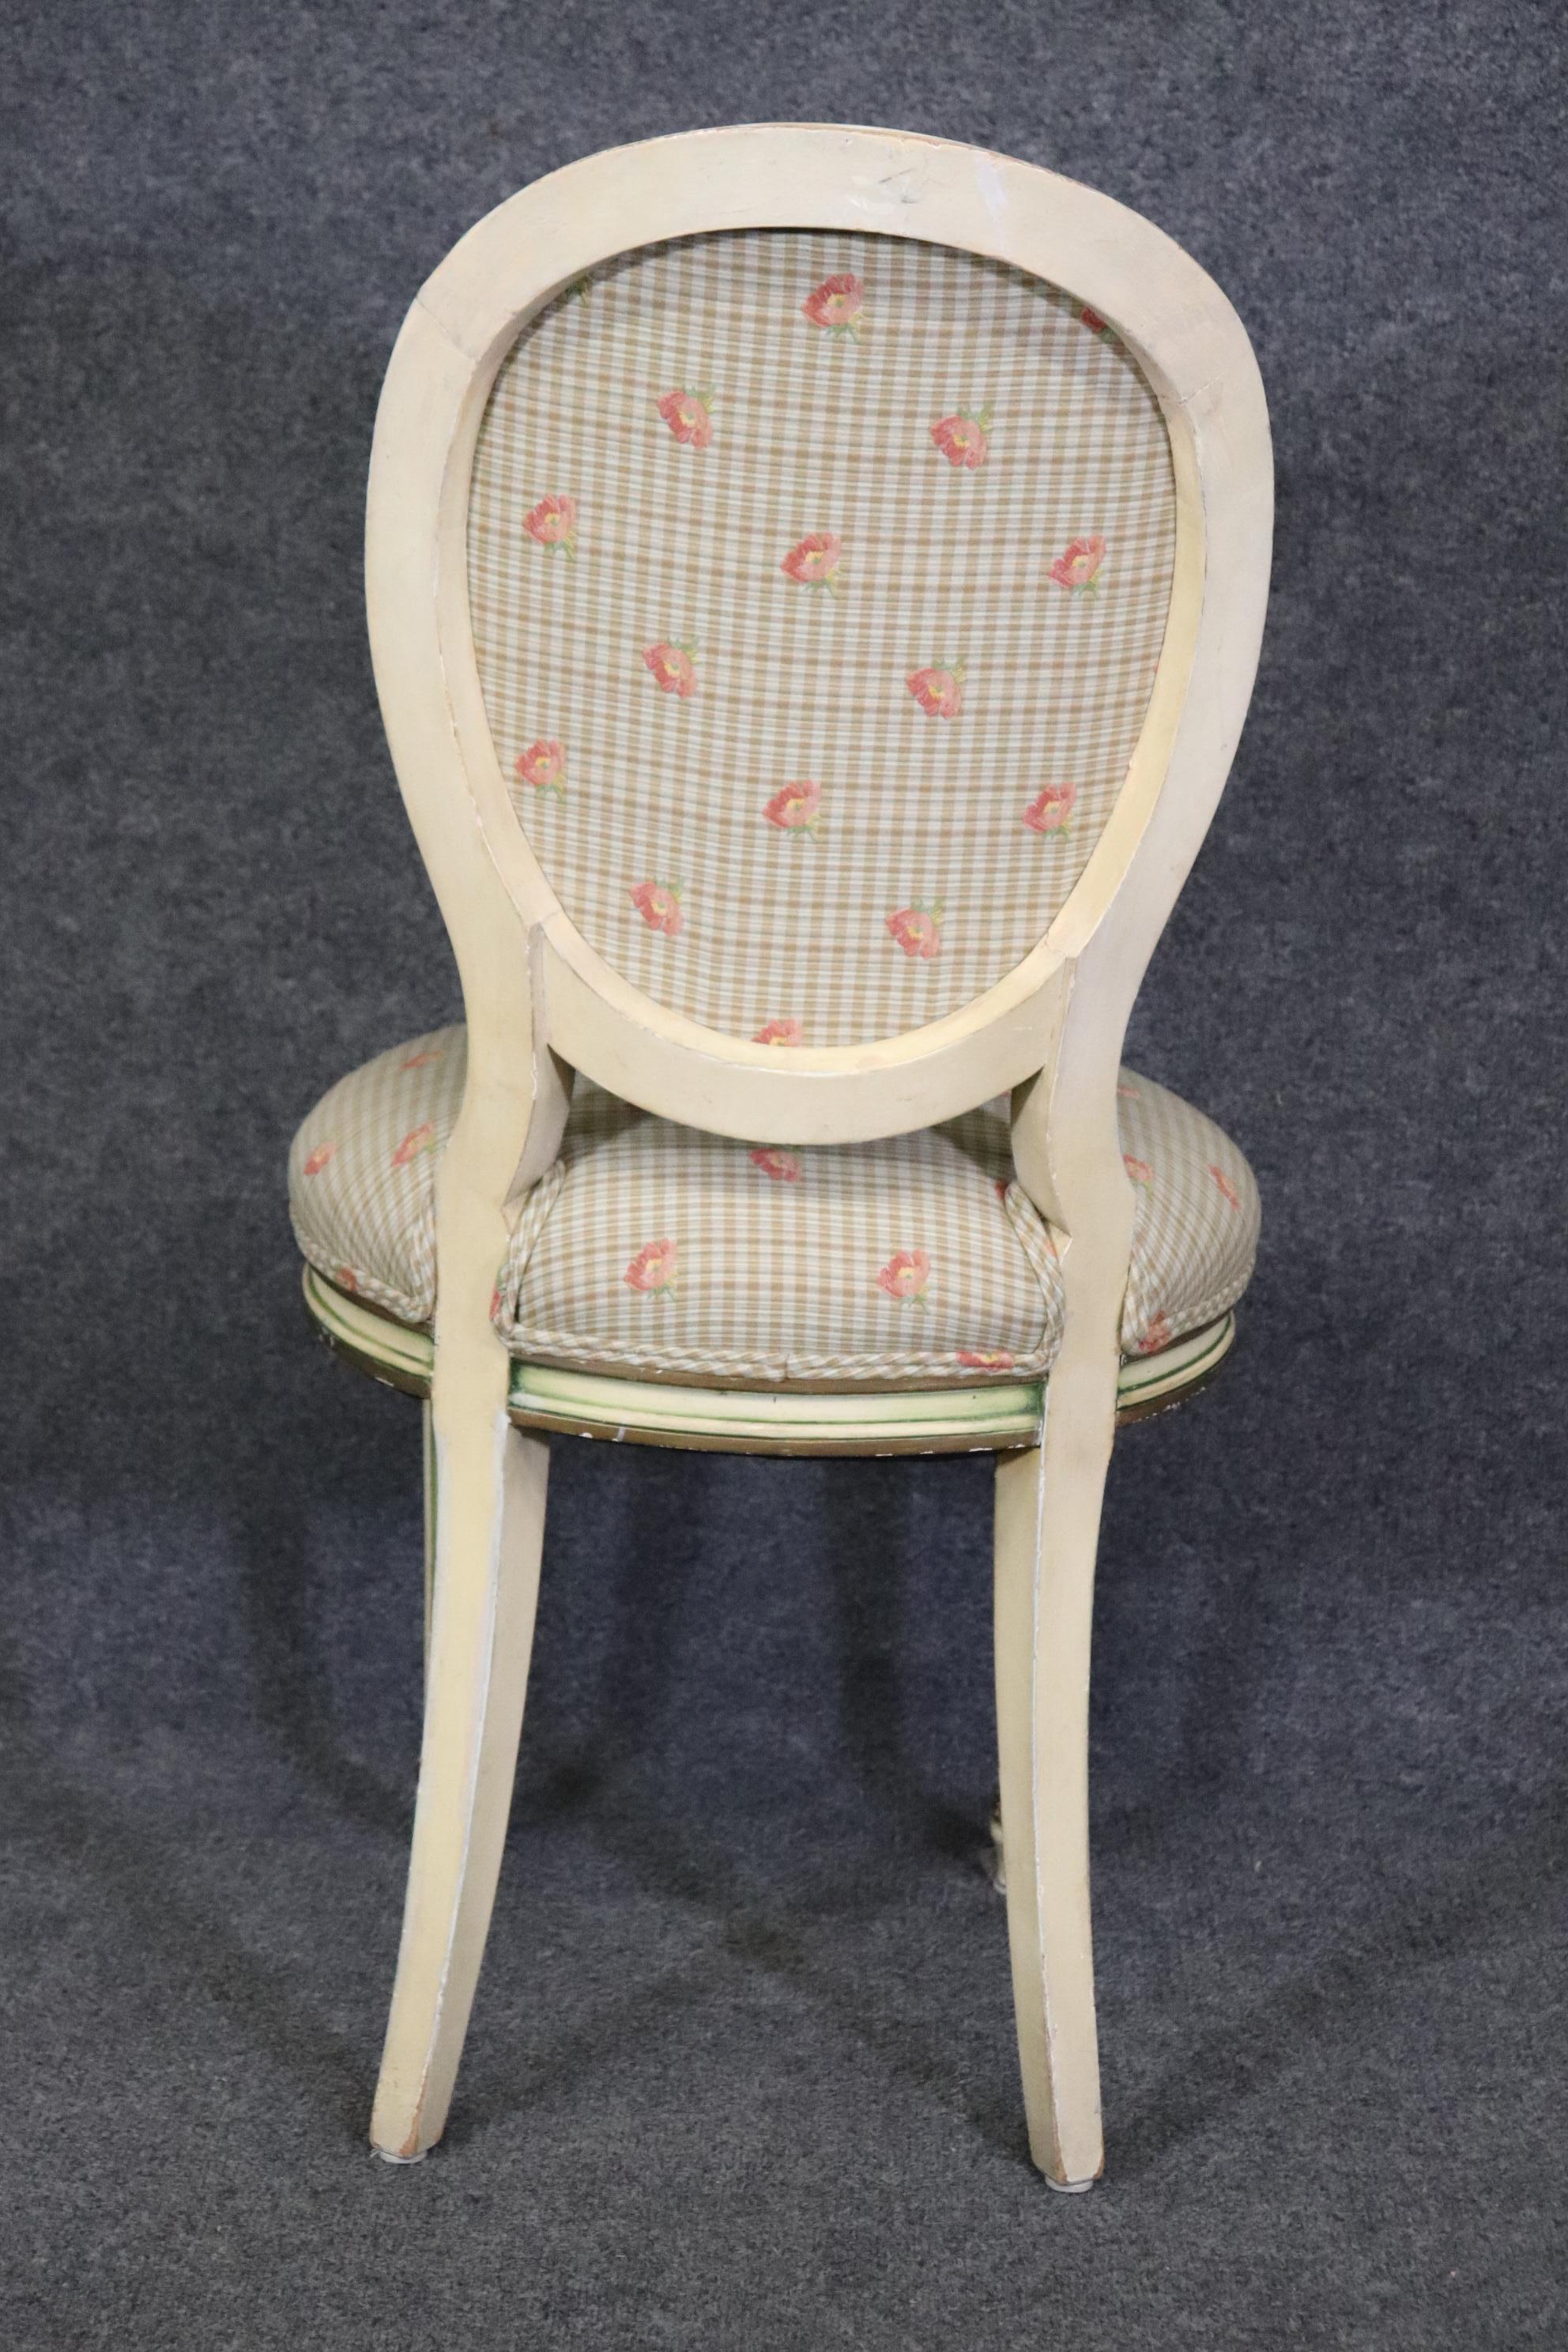 4 Vintage Louis XVI Directoire French Style Dining Chairs With Floral Upholstery In Good Condition For Sale In Swedesboro, NJ